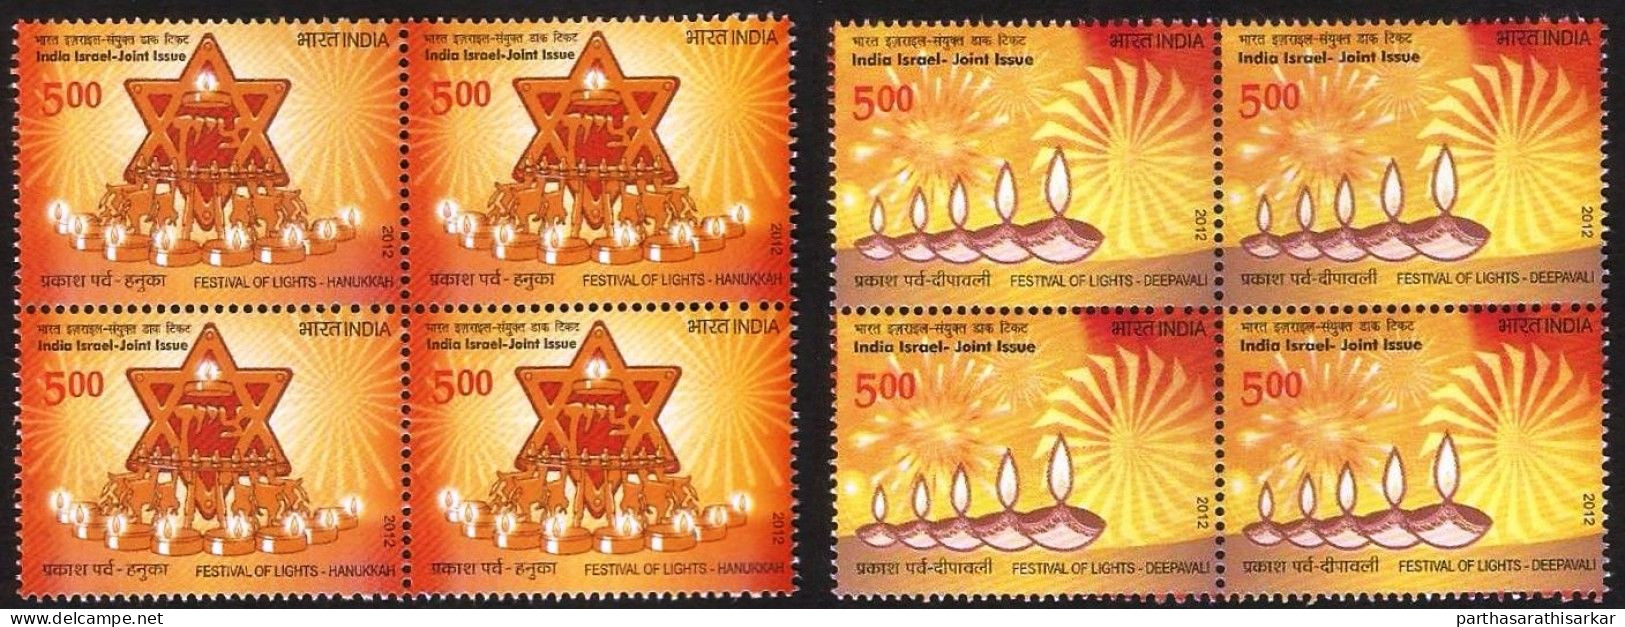 INDIA 2012 FESTIVAL OF LIGHTS JOINT ISSUE WITH ISRAEL COMPLETE SET BLOCK OF 4 MNH RARE - Neufs